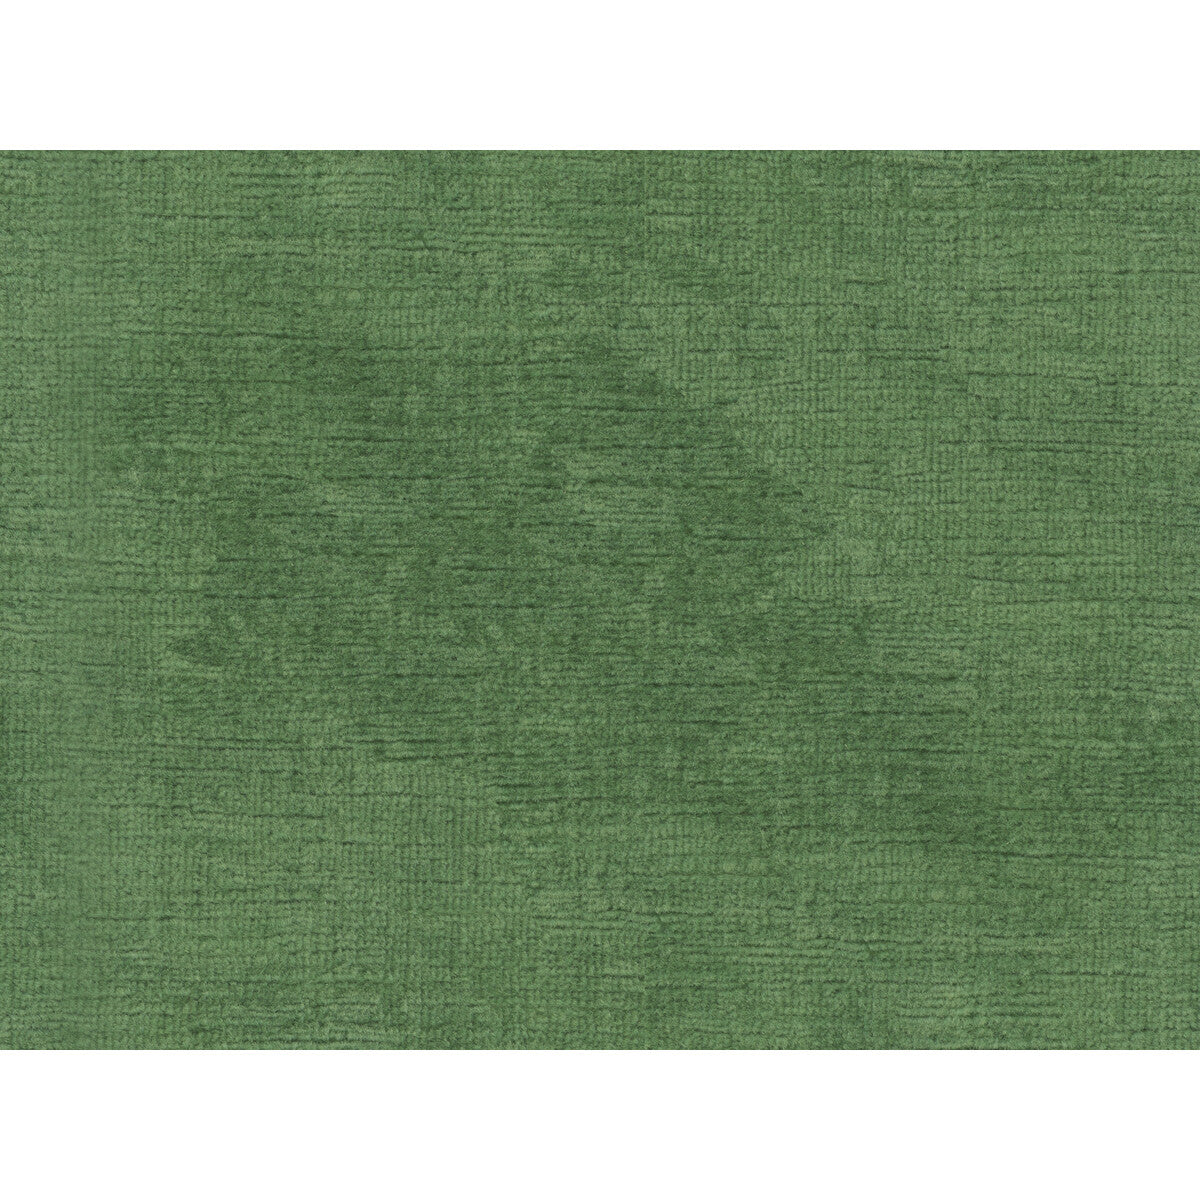 Fulham Linen V fabric in spearmint color - pattern 2016133.33.0 - by Lee Jofa